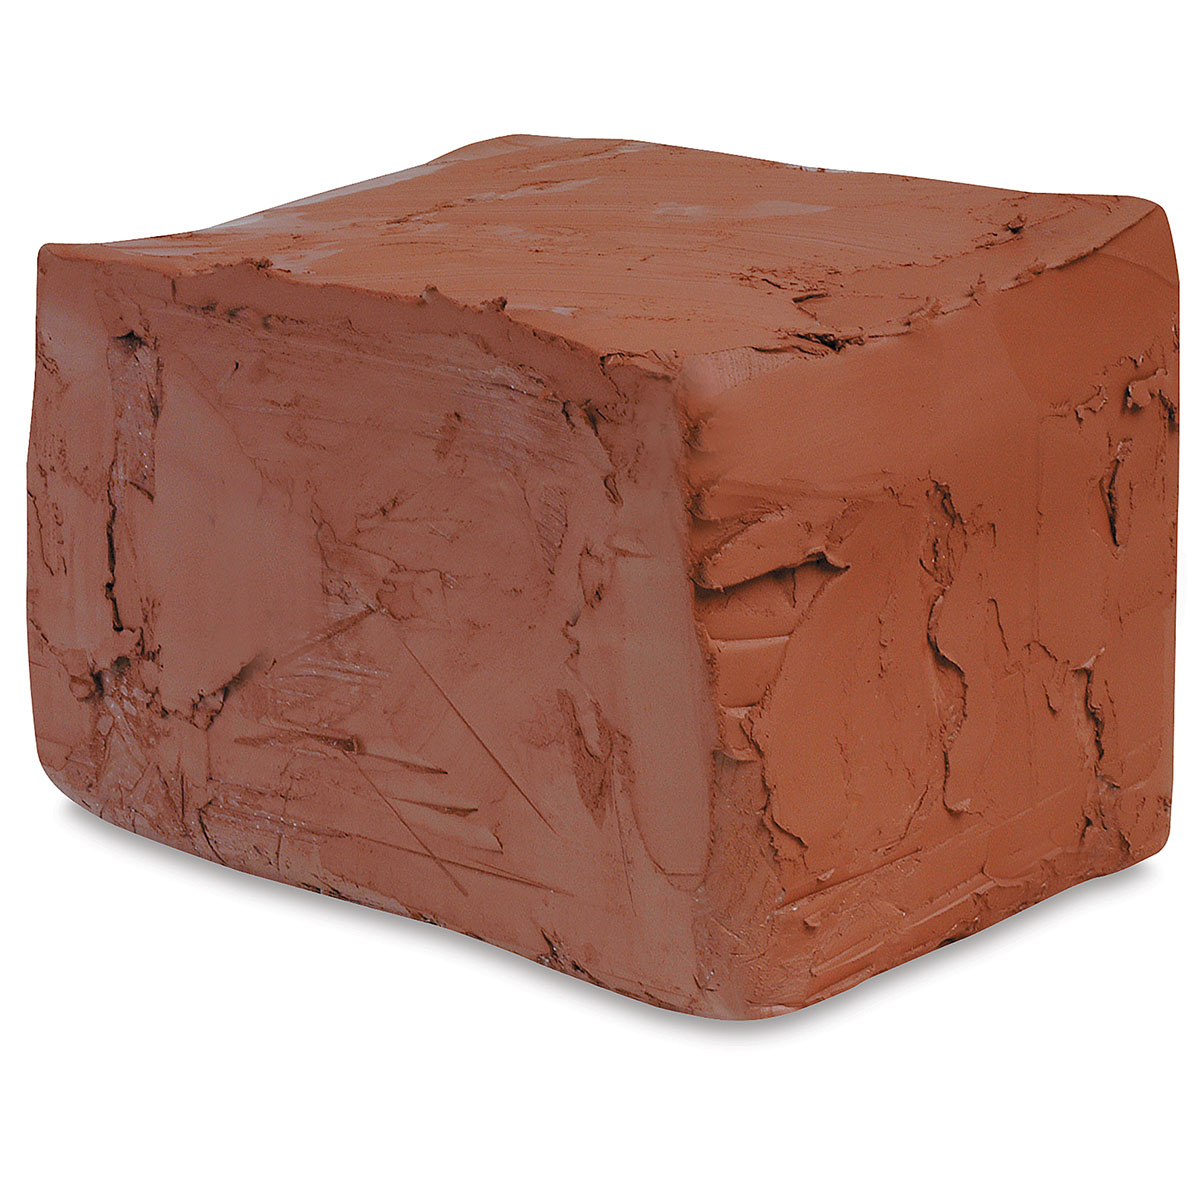 Pottery Clay Rocky Mountain Clays Red Rock Red Clay Terra Cotta Low Fire Cone 06 Red 